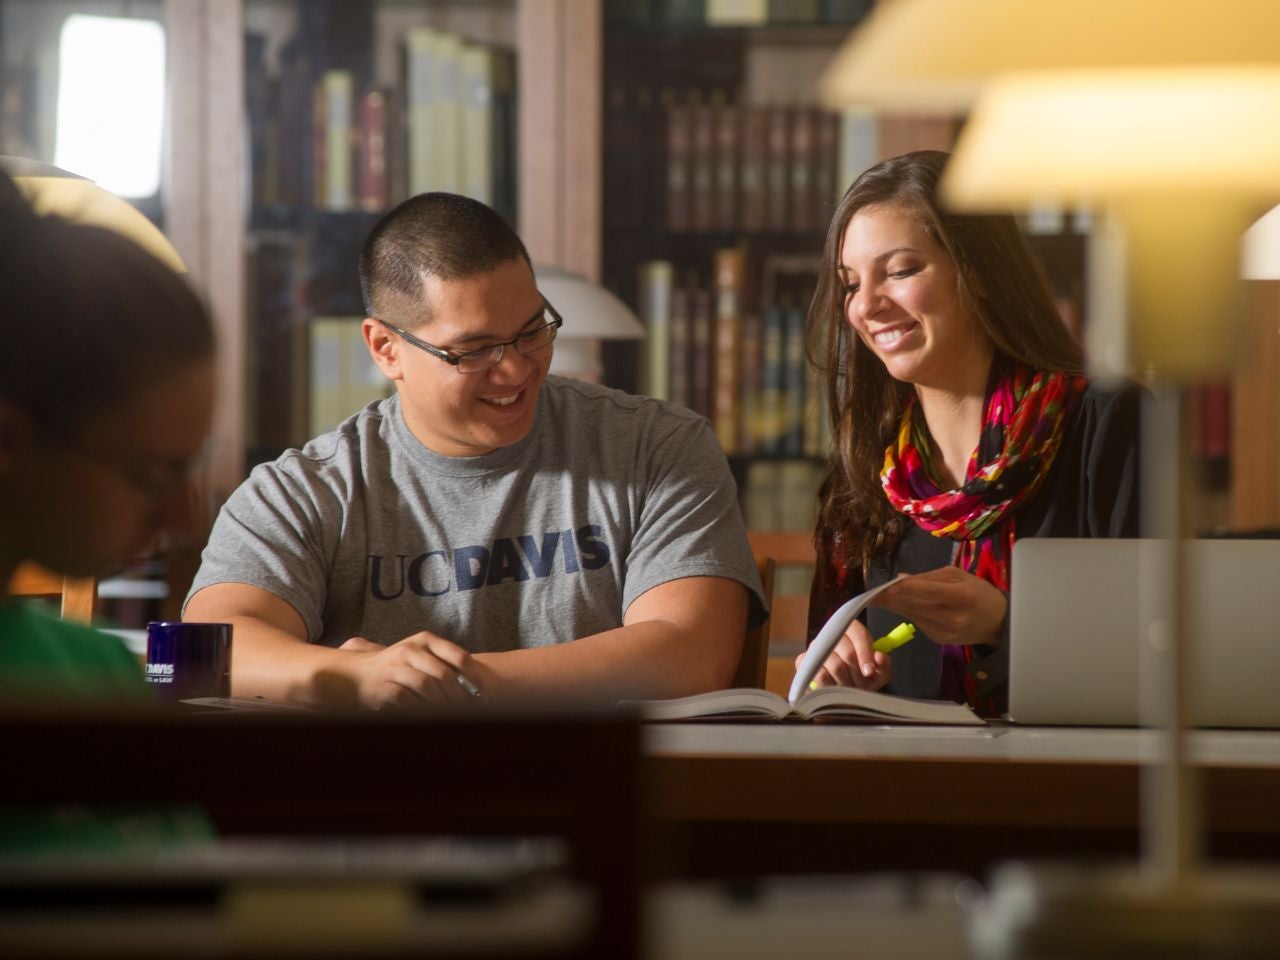 Two students sit at a desk in a library, smiling and looking down at the textbook open between them.